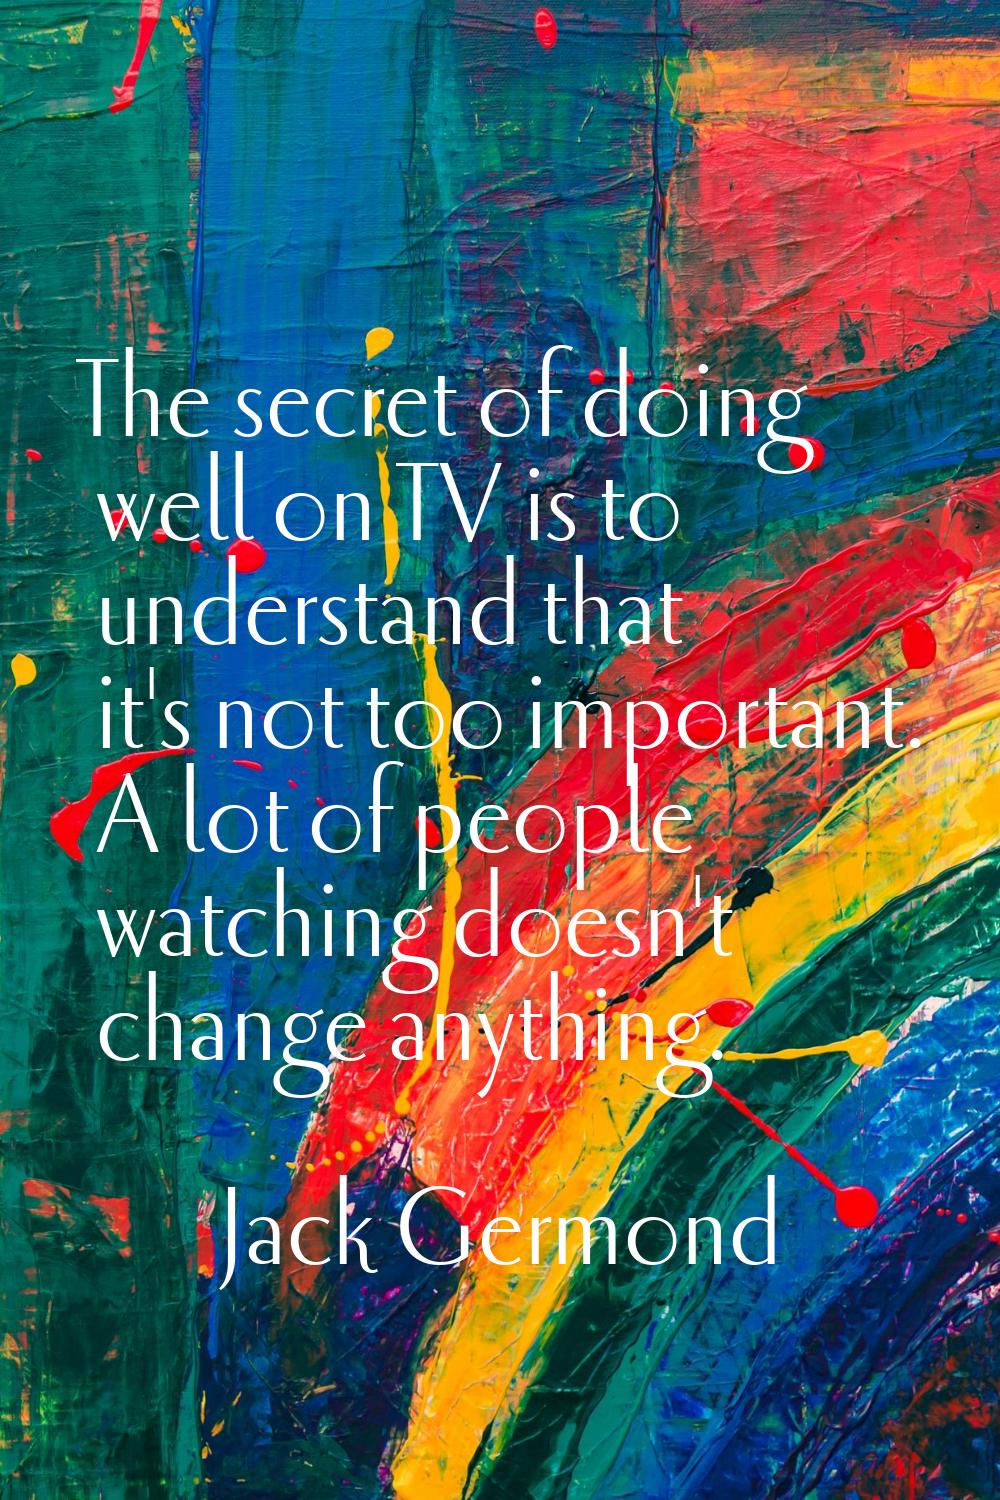 The secret of doing well on TV is to understand that it's not too important. A lot of people watchi